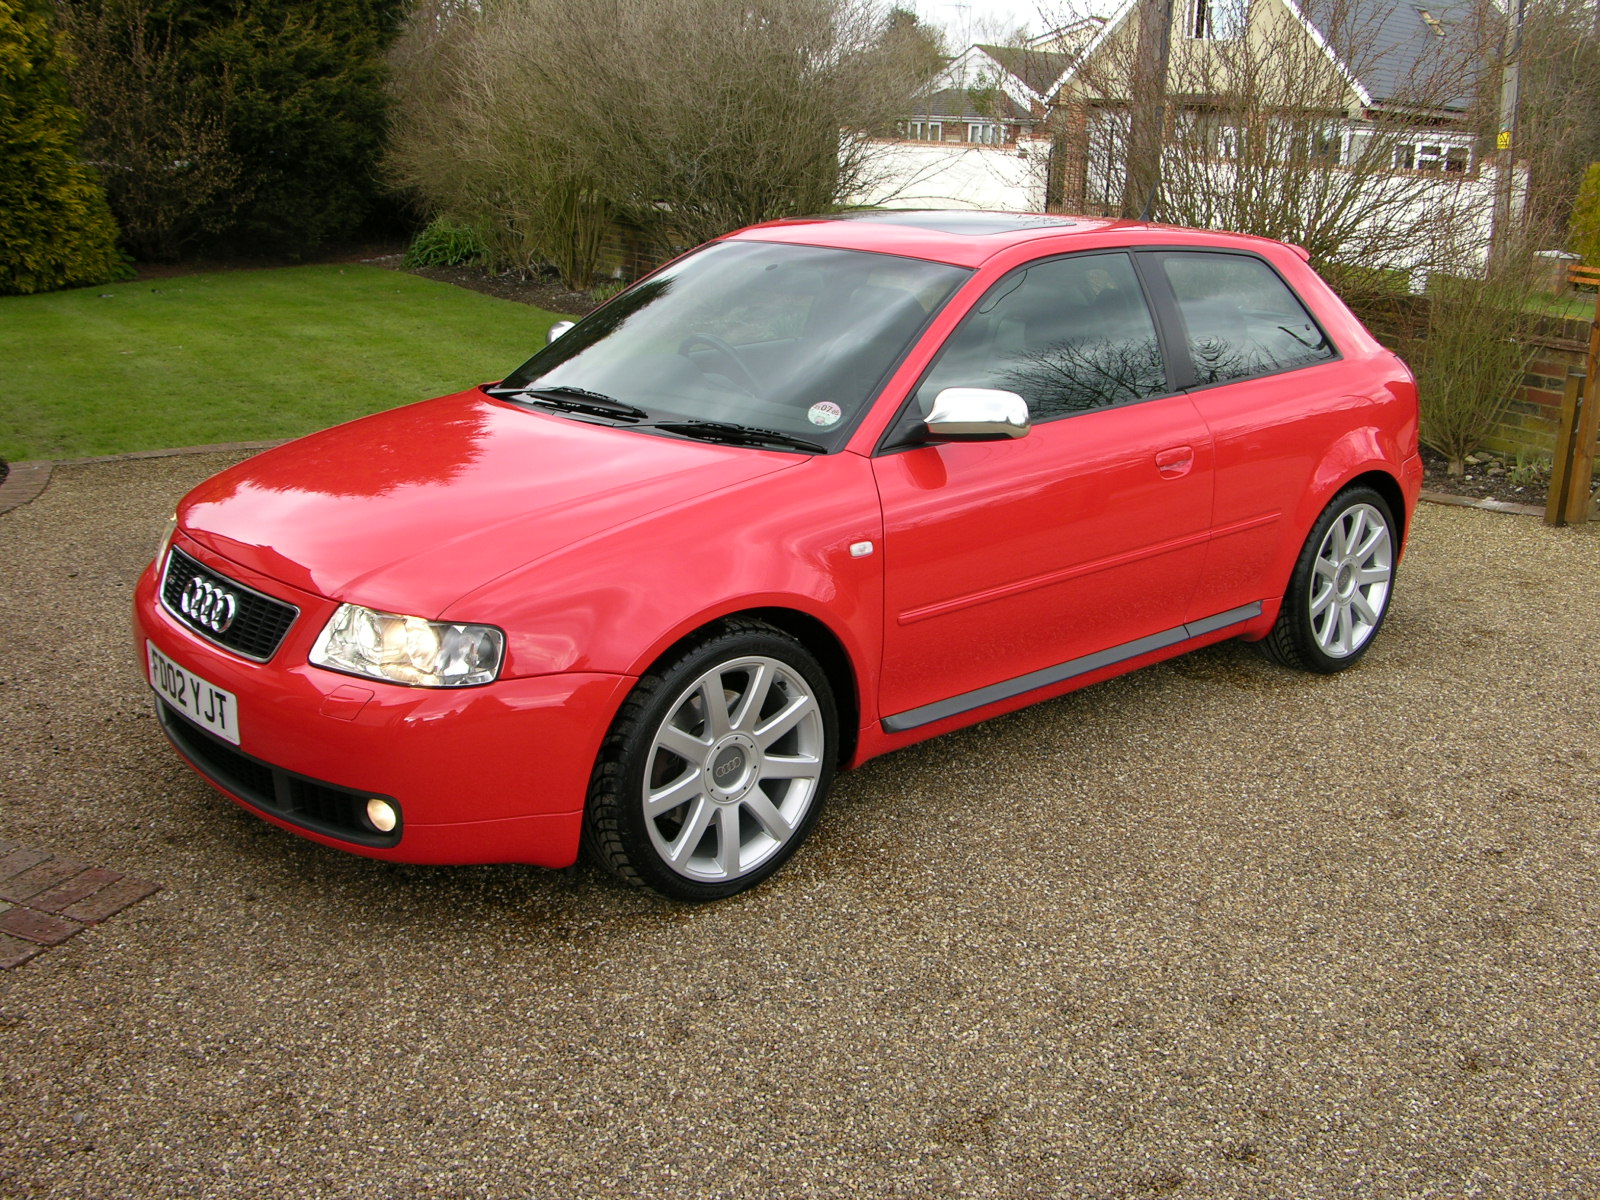 Audi_S3_2002_Absolute_Red_-_Flickr_-_The_Car_Spy_%2811%29.jpg